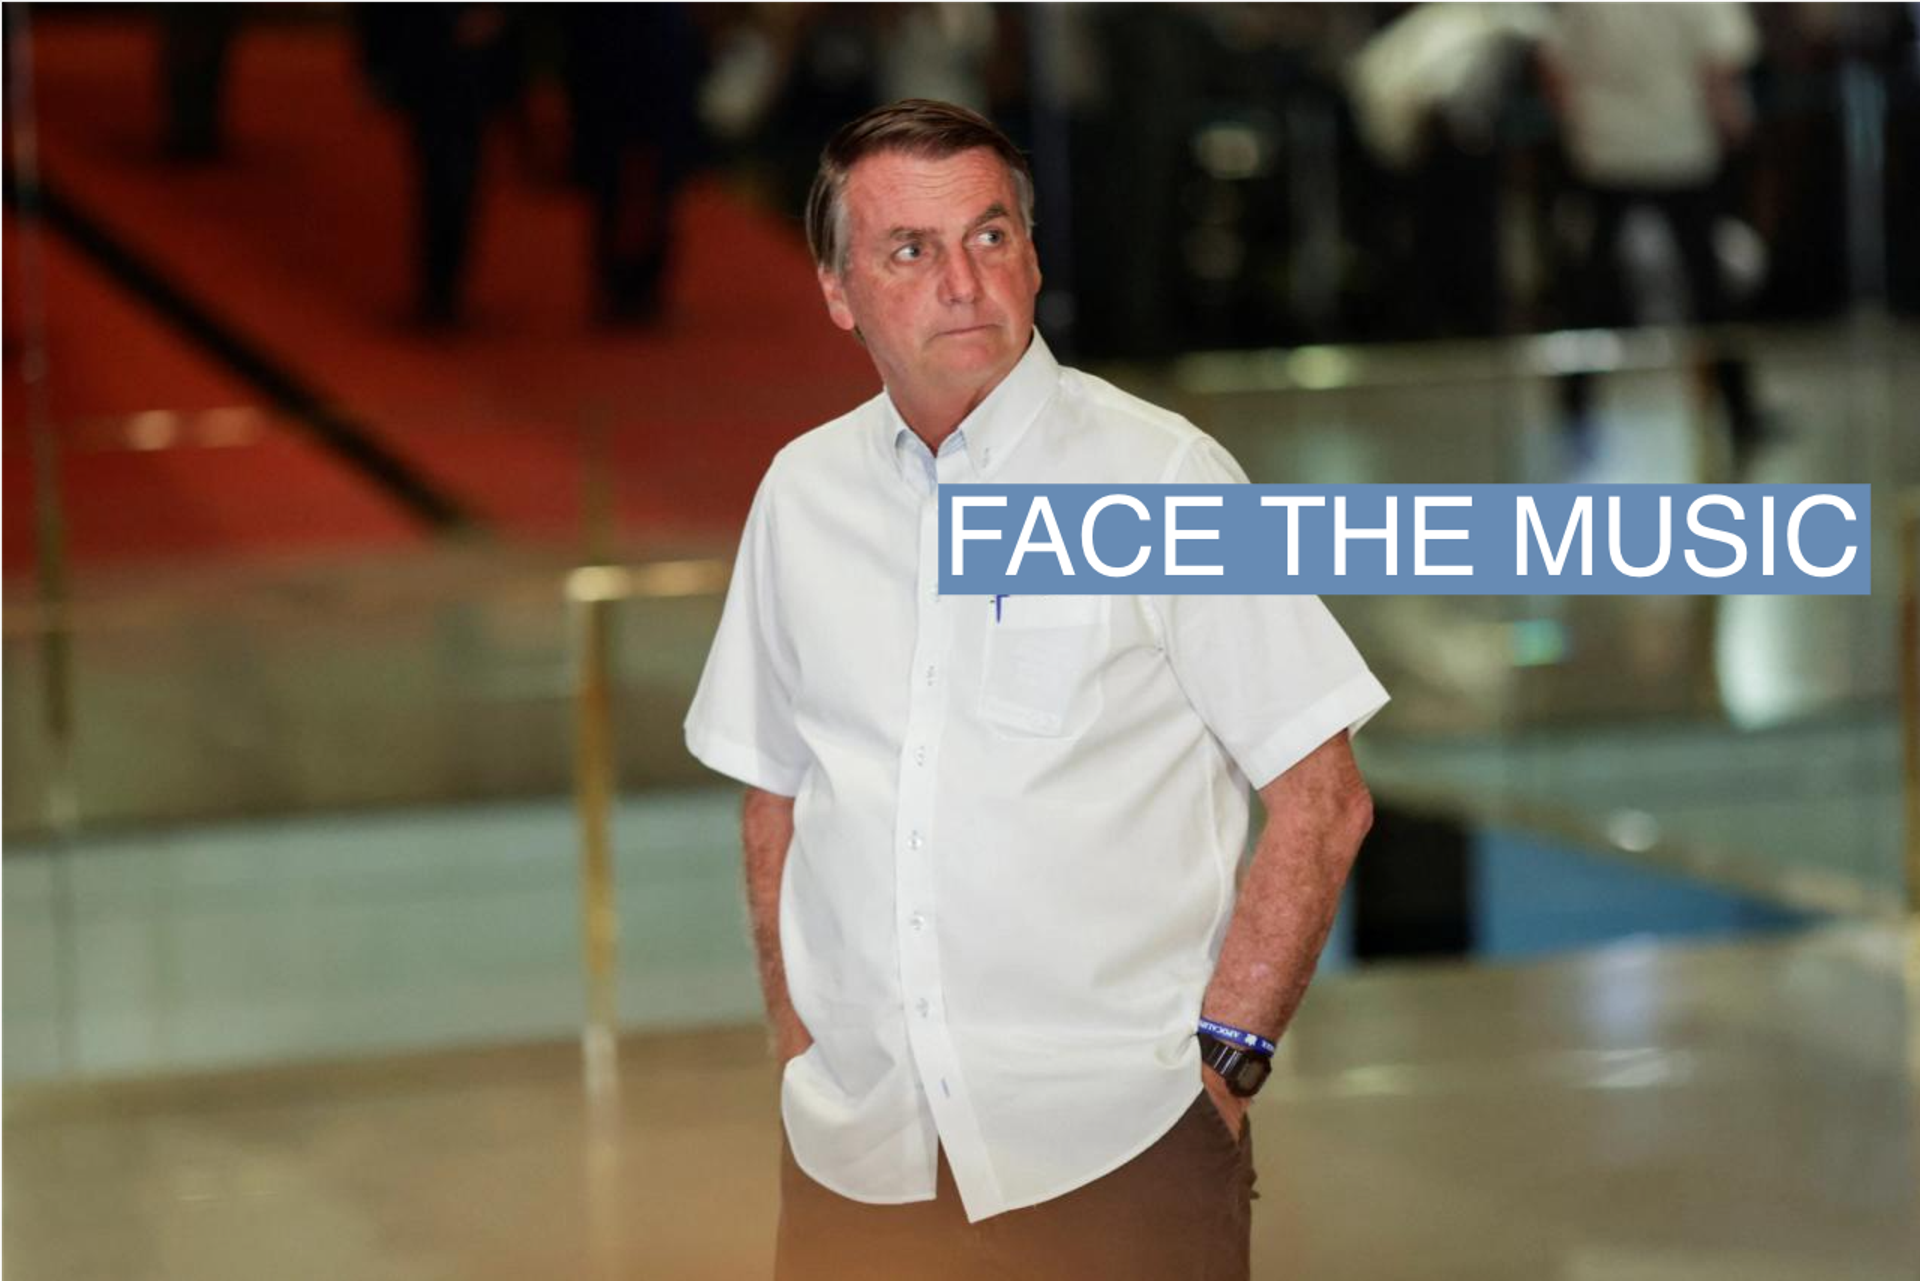 Jair Bolsonaro arrives to a news conference on October 26, 2022.